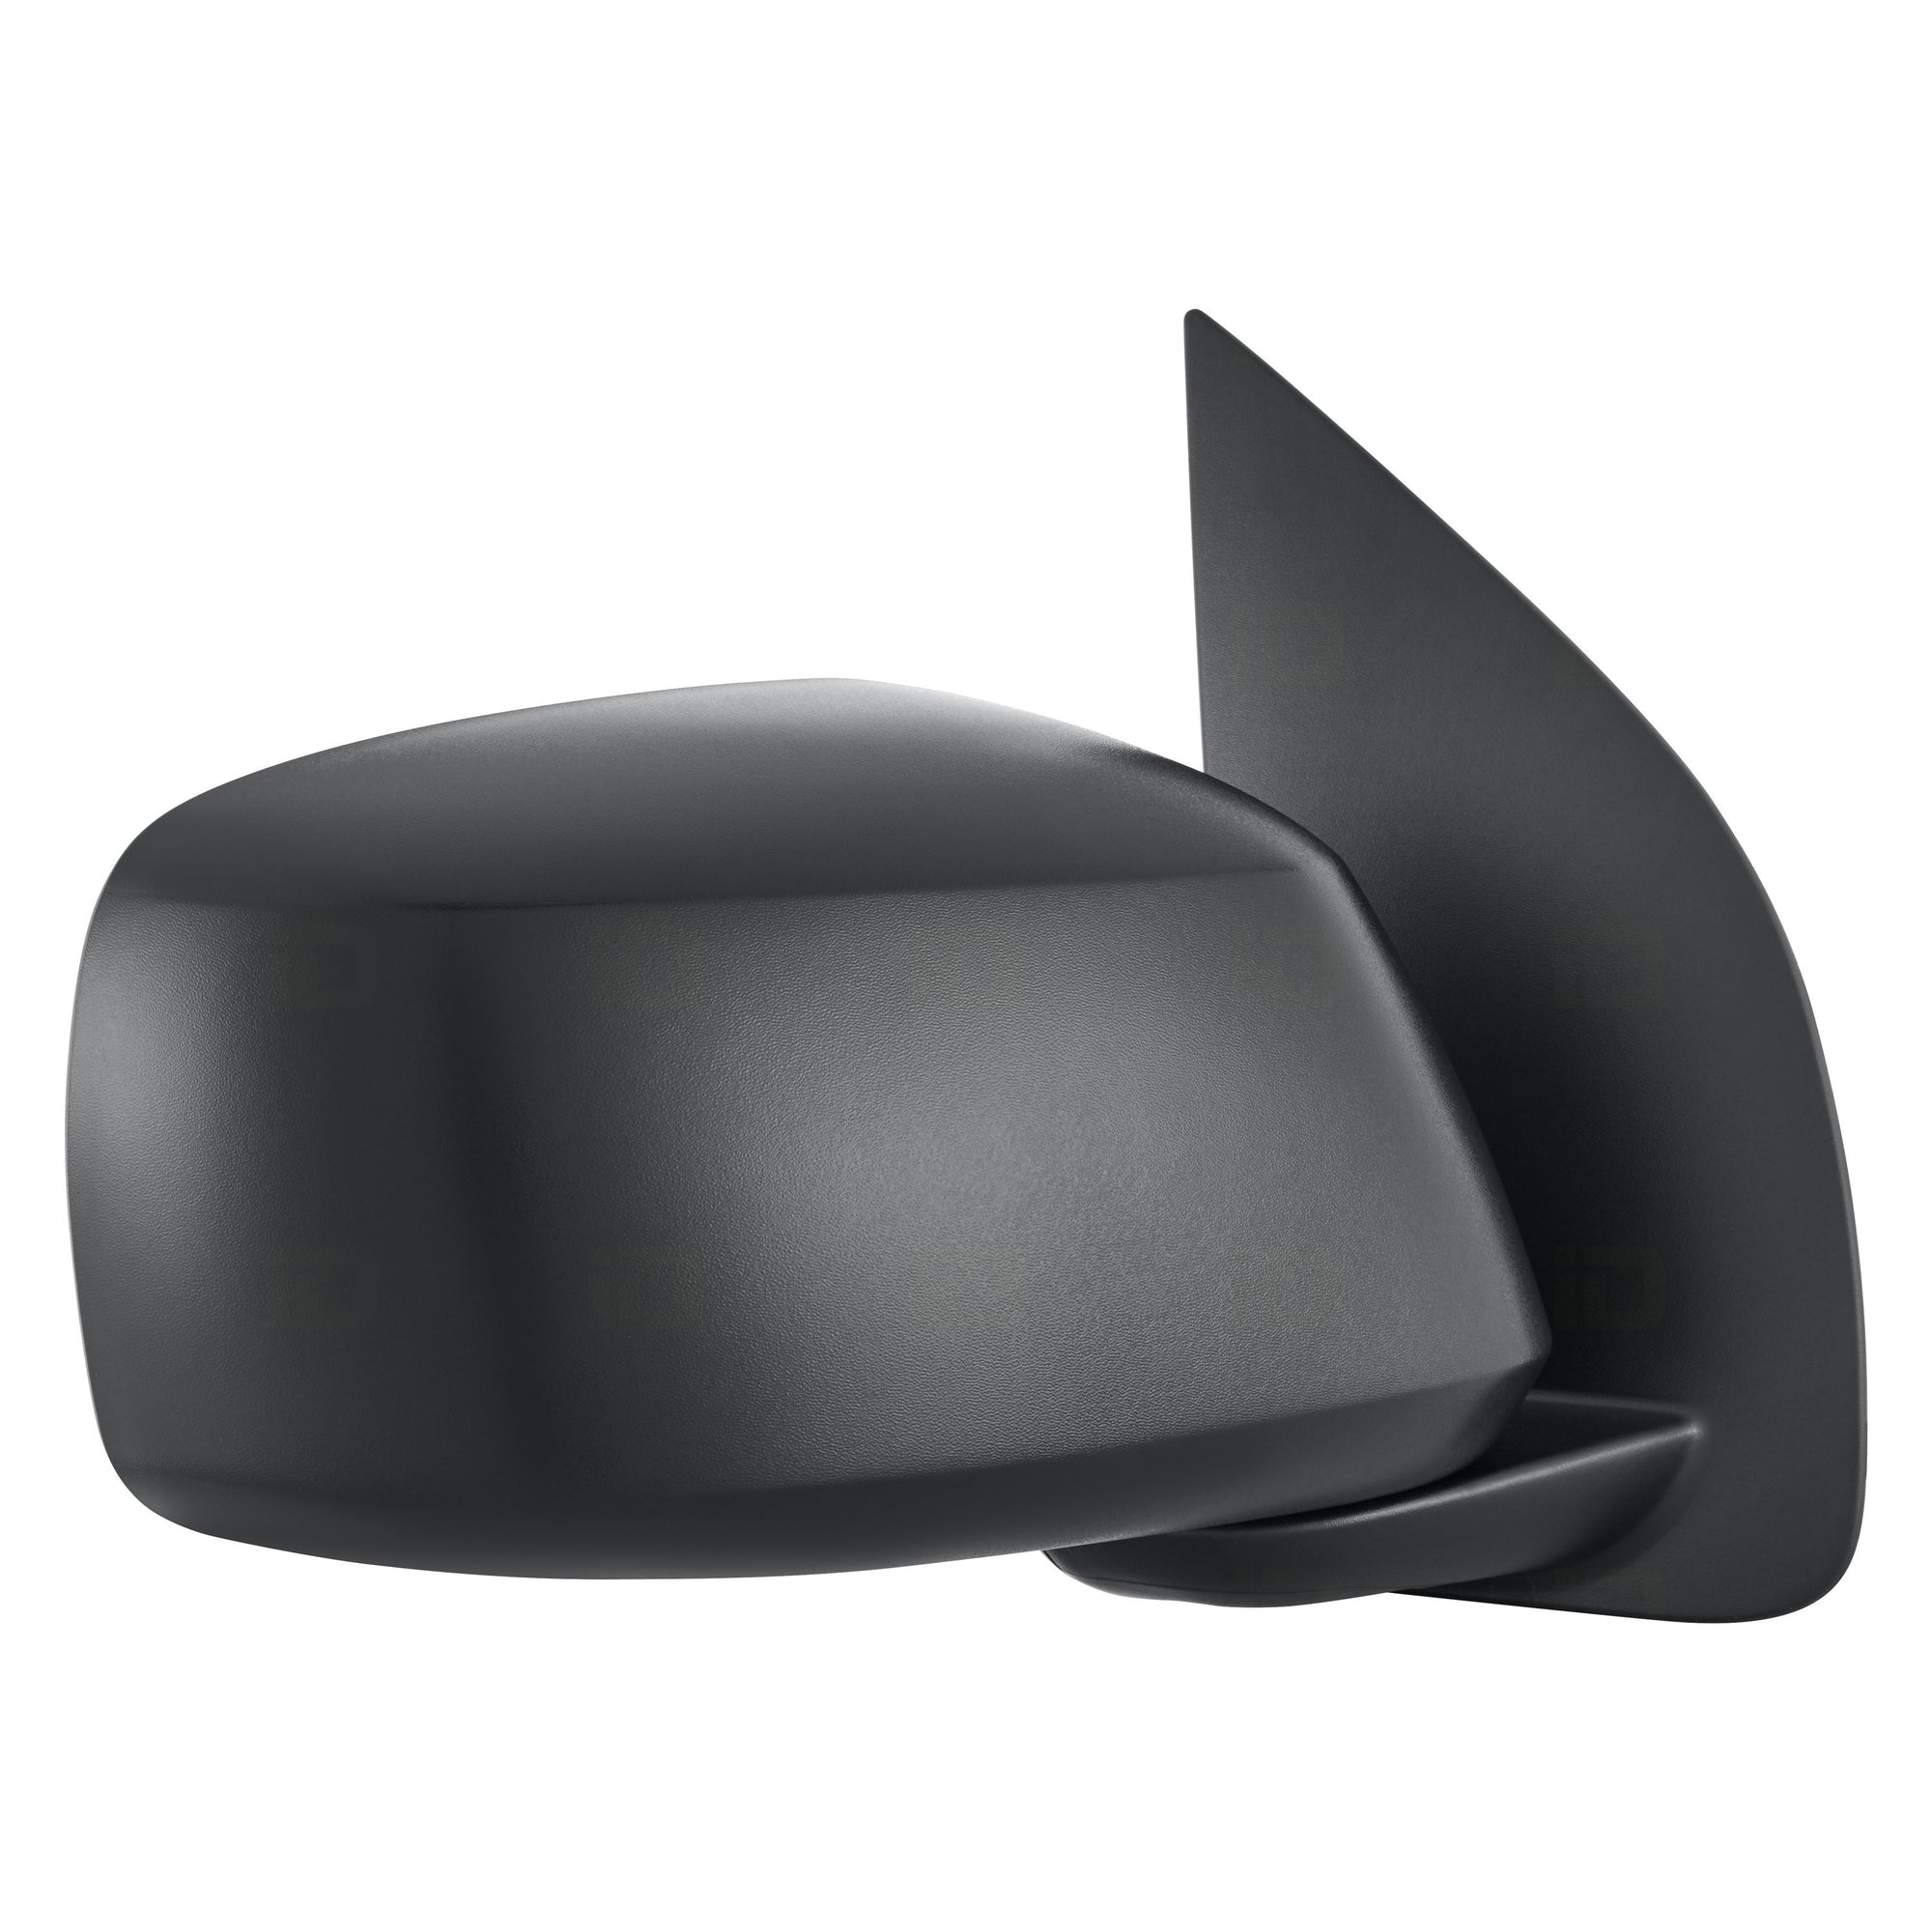 05-2012 nissan pathfinder side view mirror NI1321201 right